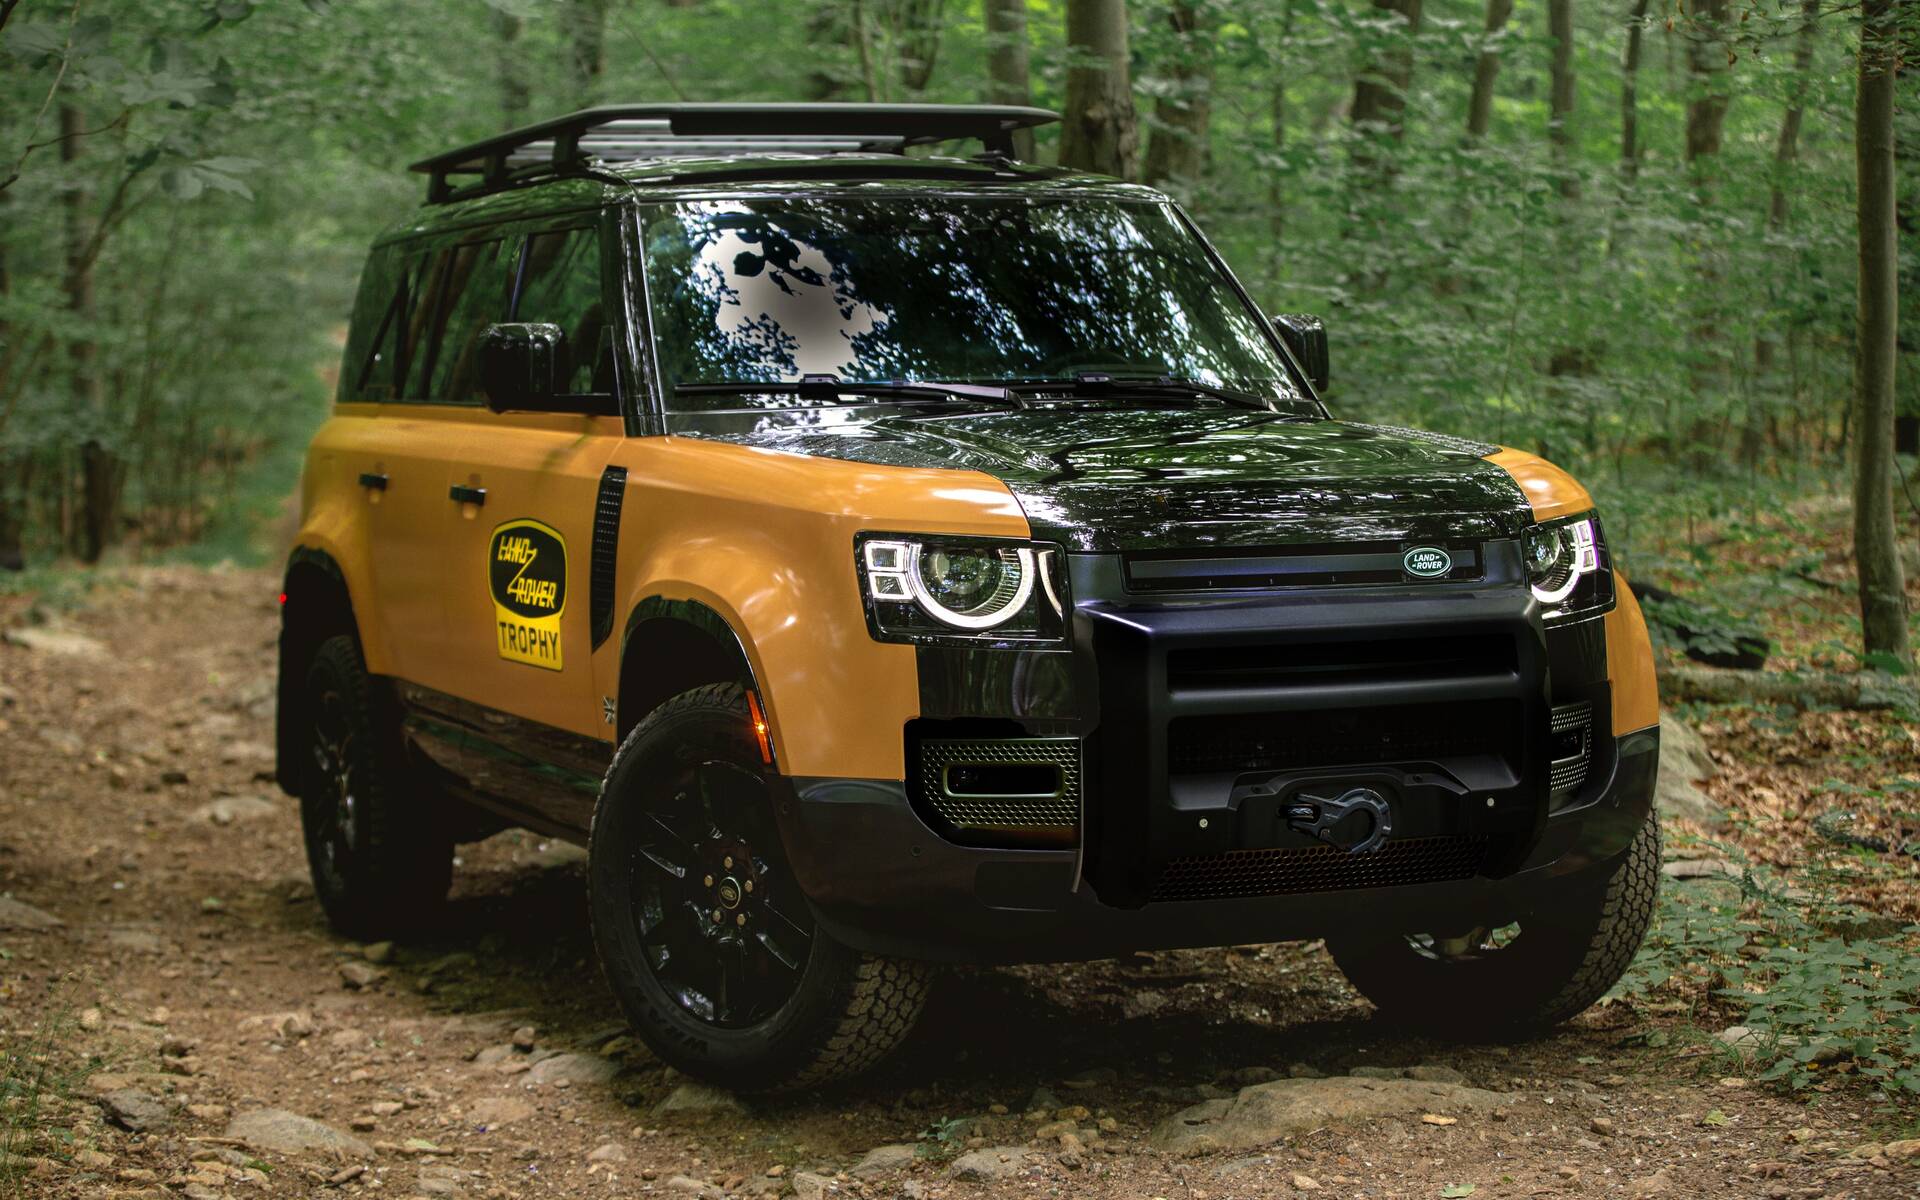 Land Rover Defender Trophy Edition Aimed at Select Adventurers - The